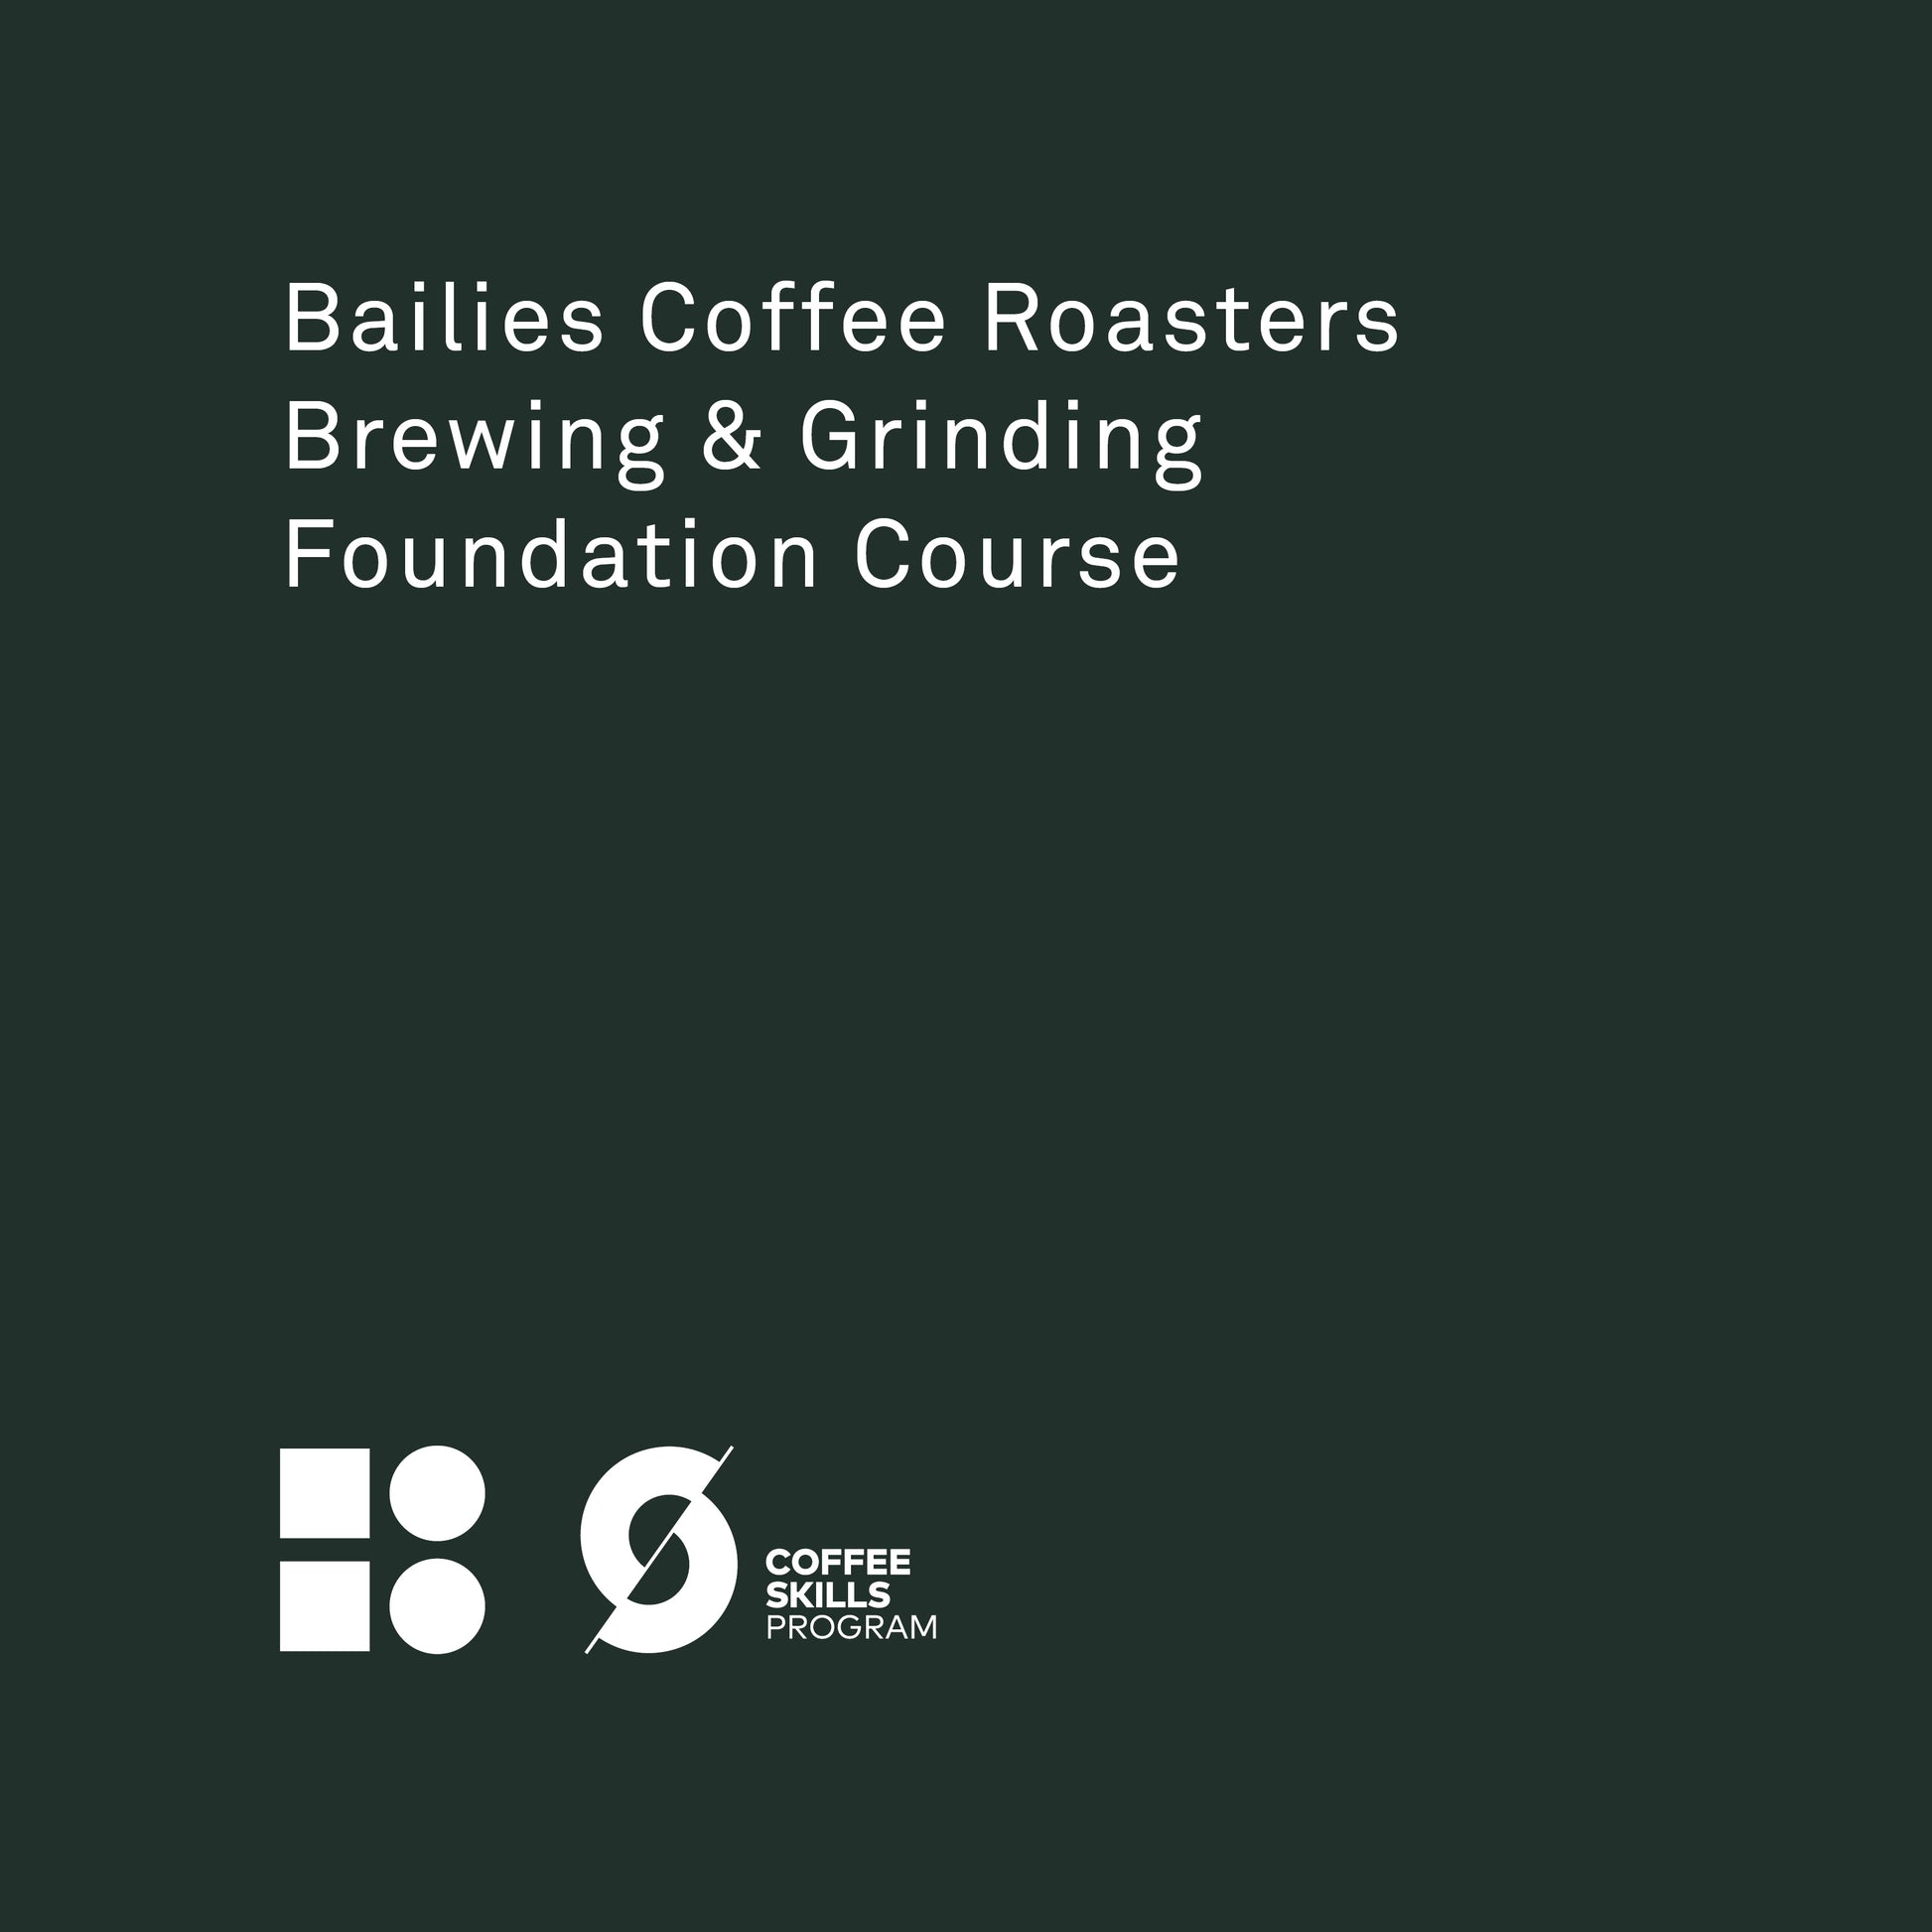 SCA Brewing & Grinding Foundation - Bailies Coffee Roasters